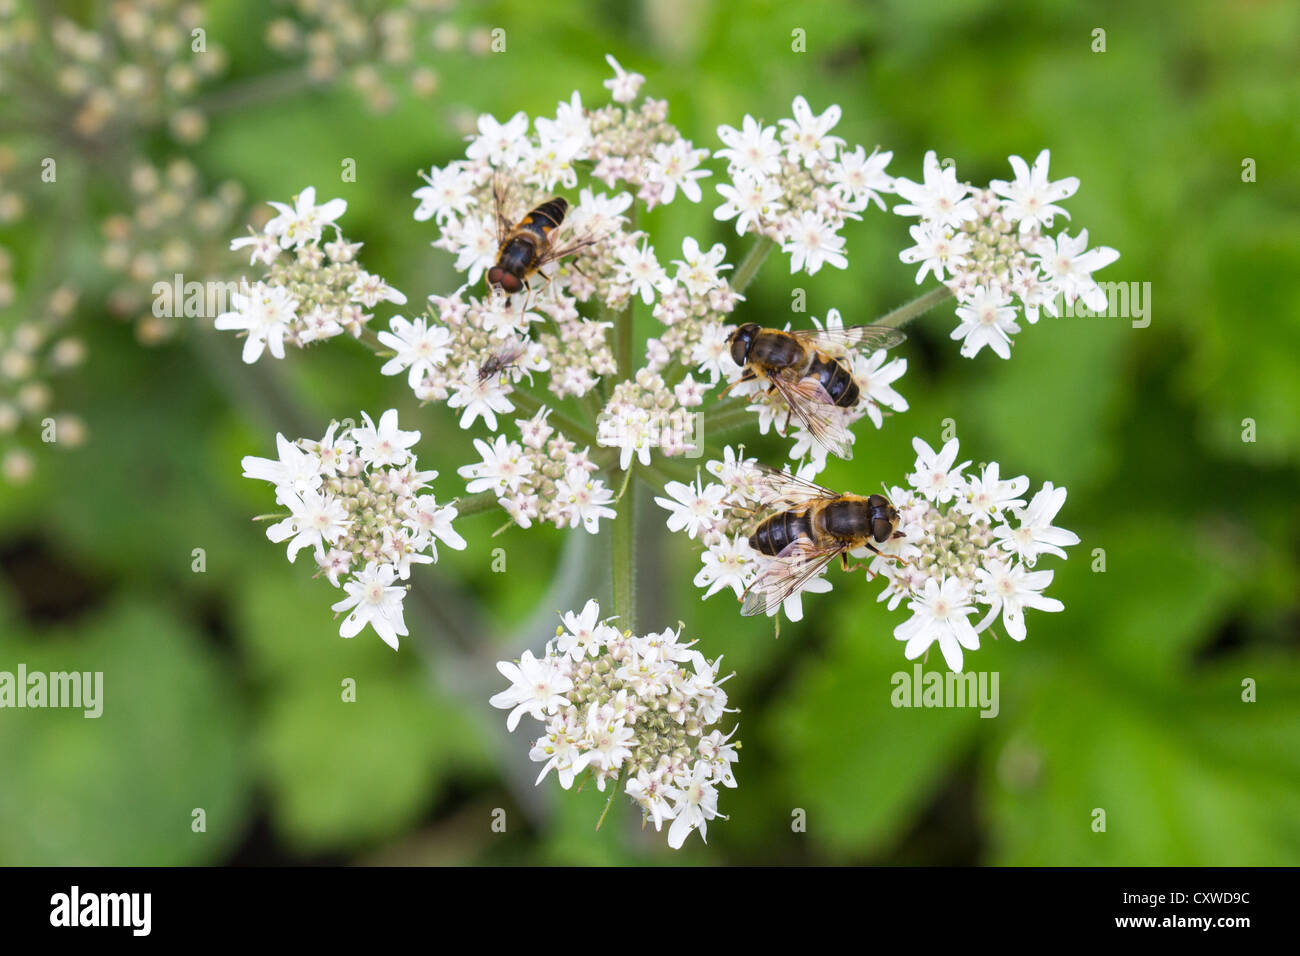 worker bees gathering nectar from white Cow Parsley flowers Stock Photo